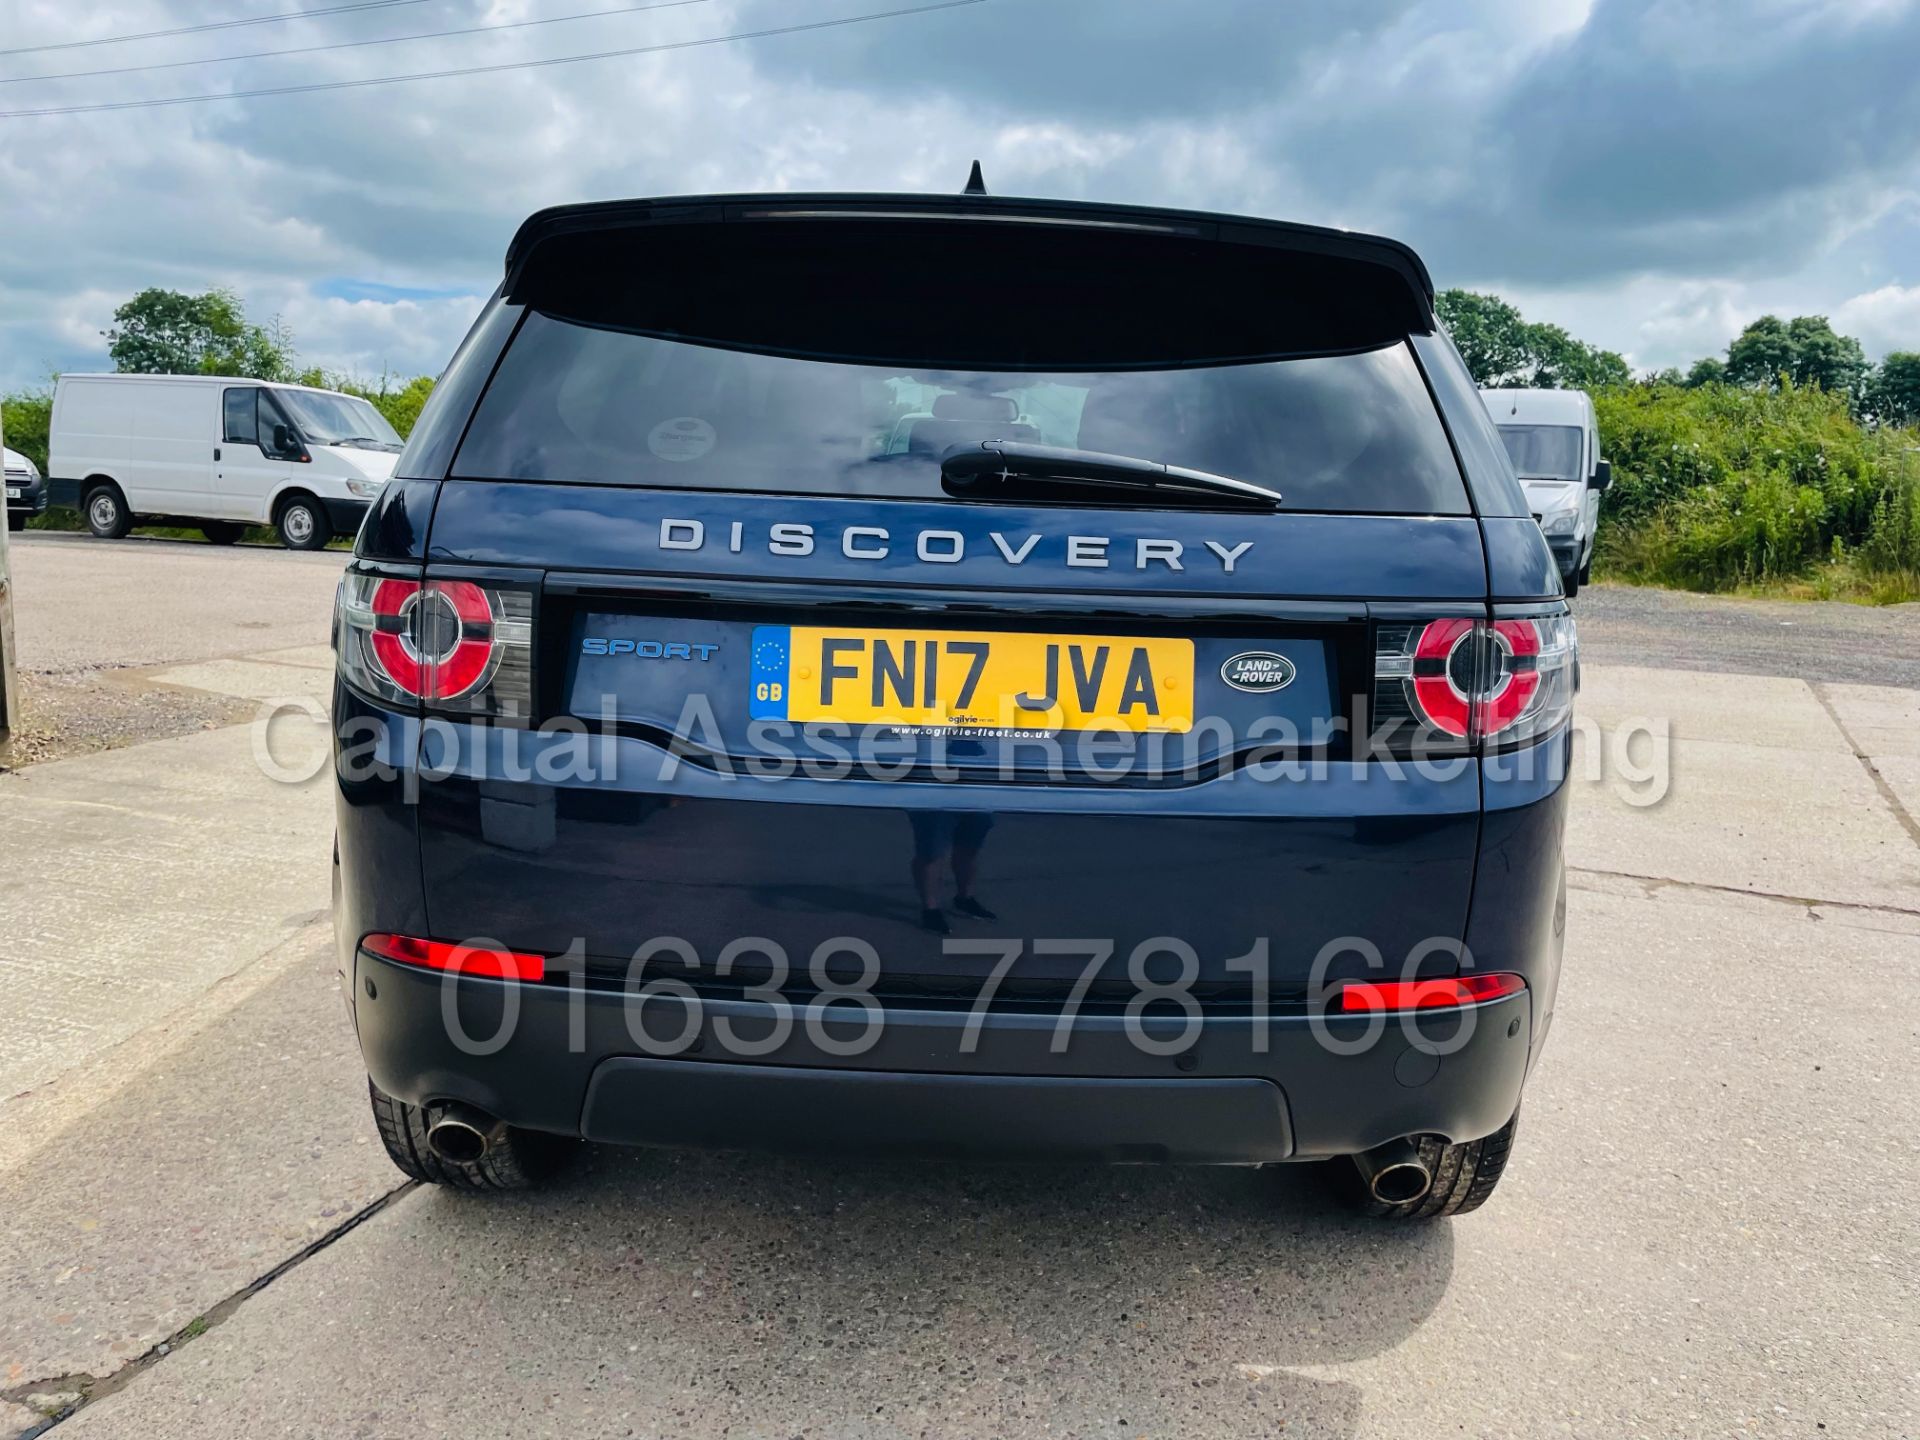 (On Sale) LAND ROVER DISCOVERY SPORT *SPECIAL EDITION* SUV (2017 - EURO 6) '2.0 TD4 - STOP/START' - Image 7 of 50